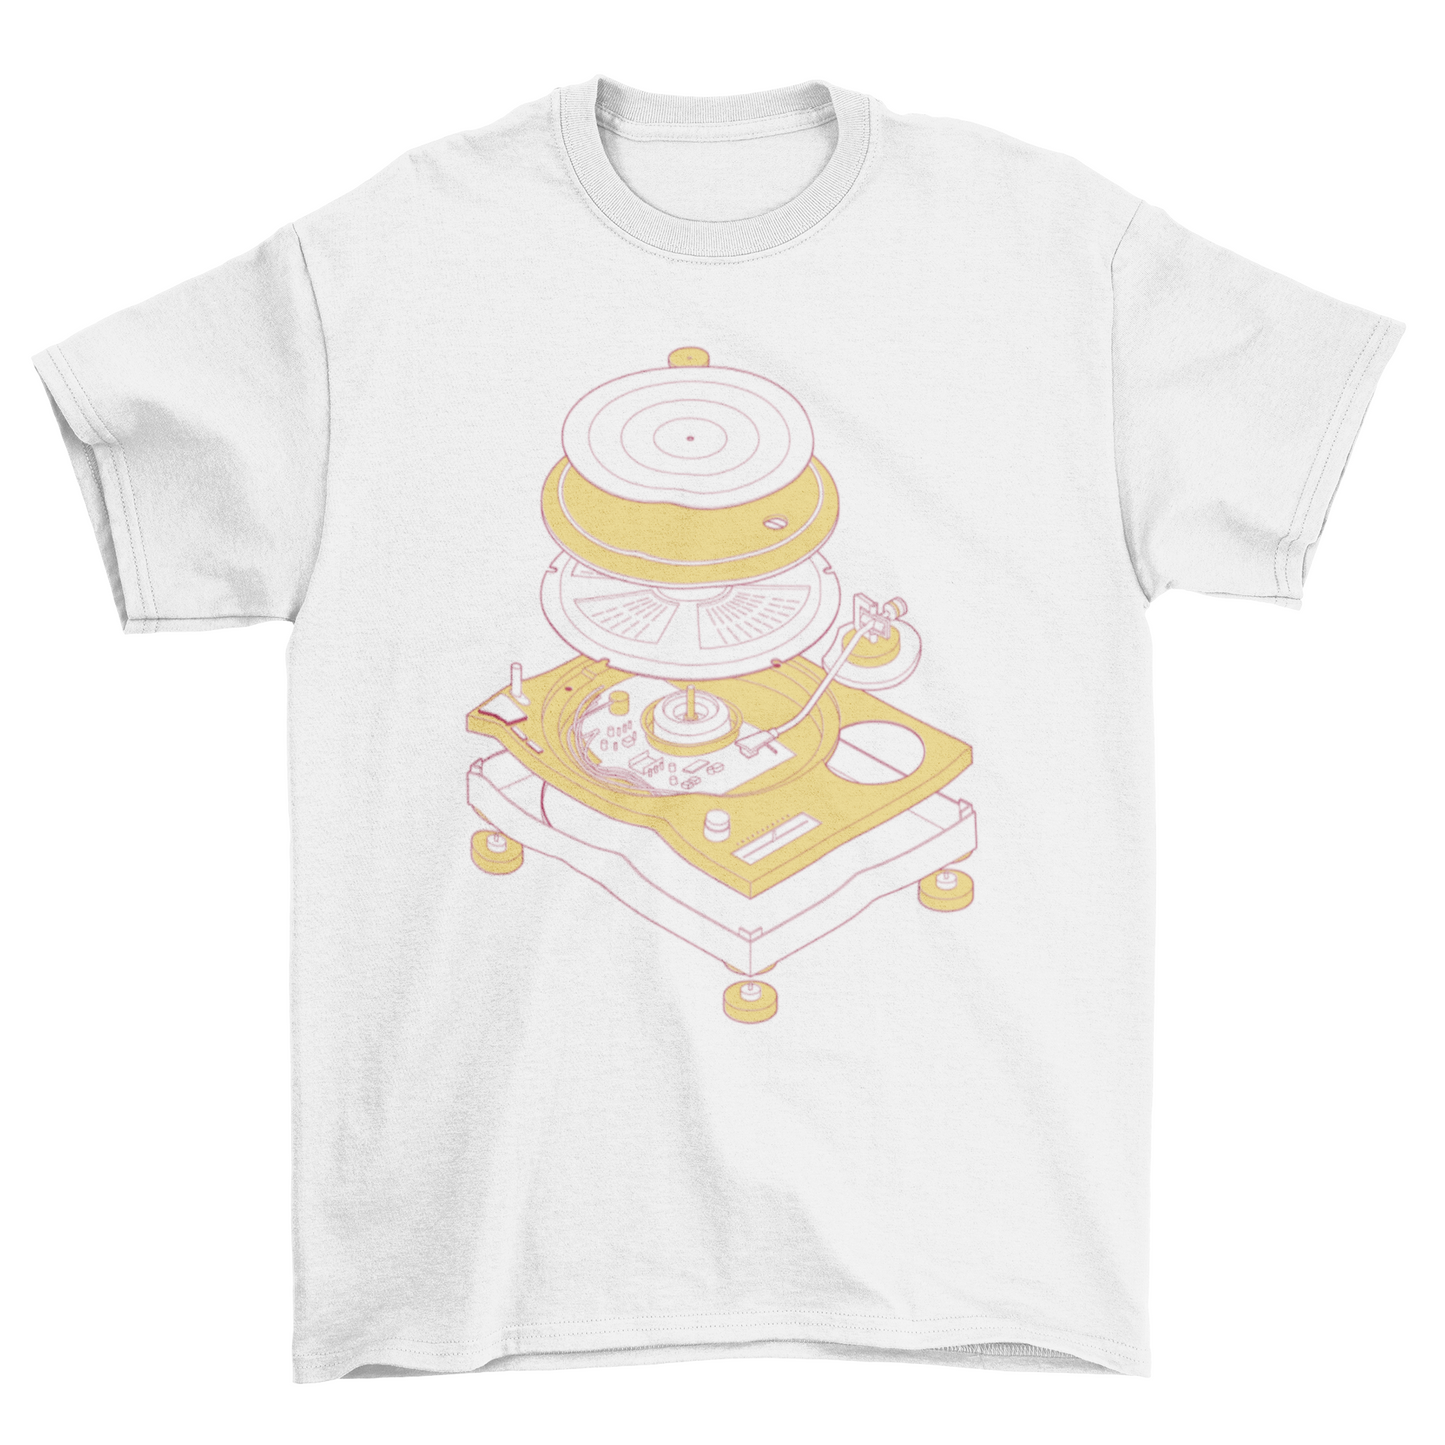 Turntable exploded view t-shirt